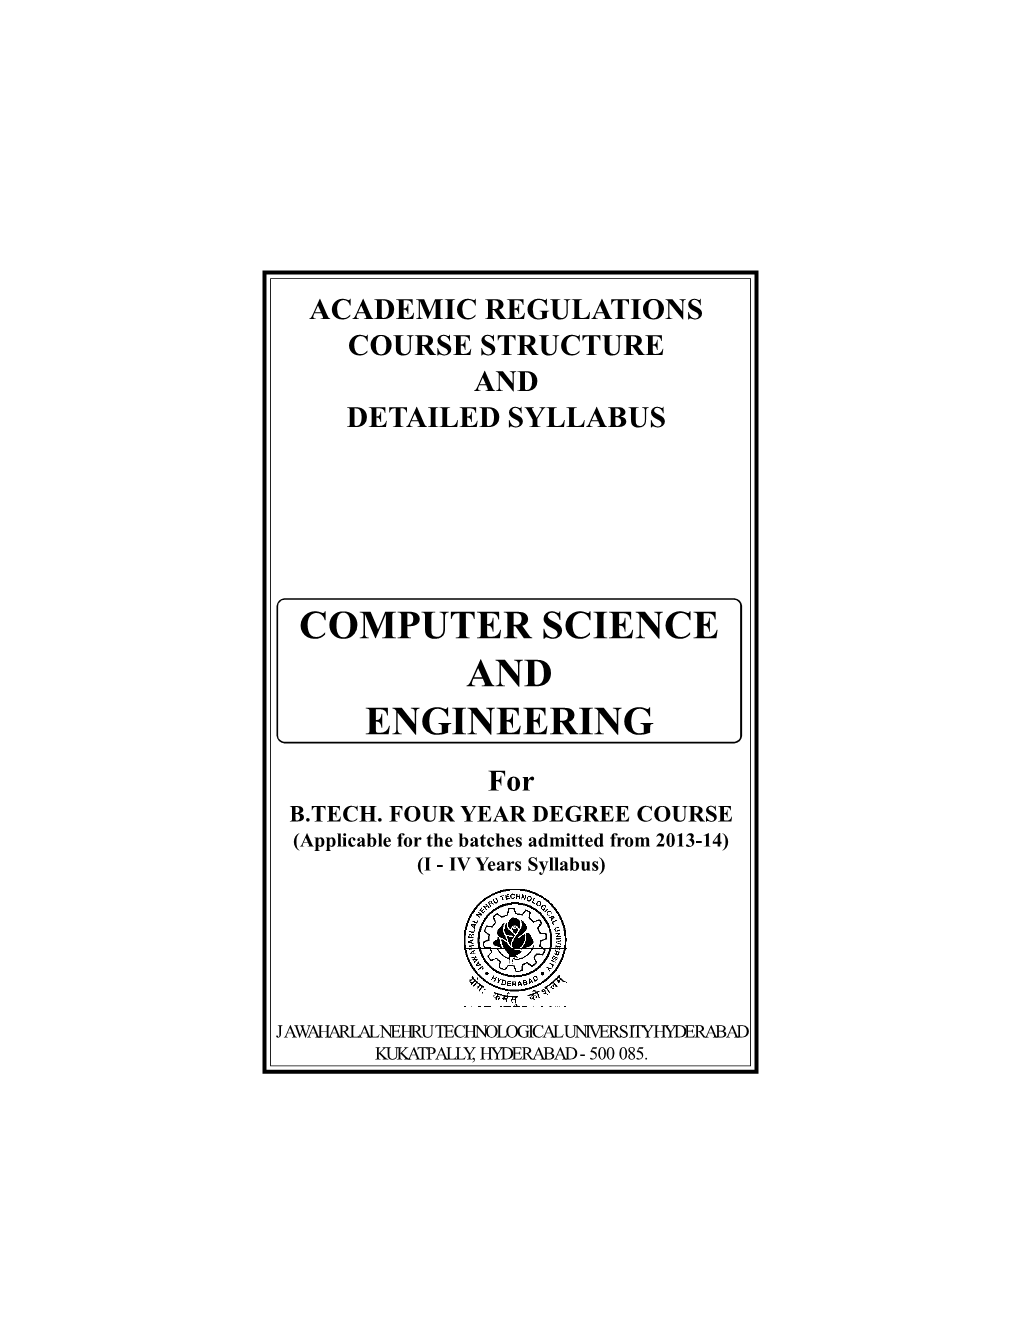 COMPUTER SCIENCE and ENGINEERING for B.TECH